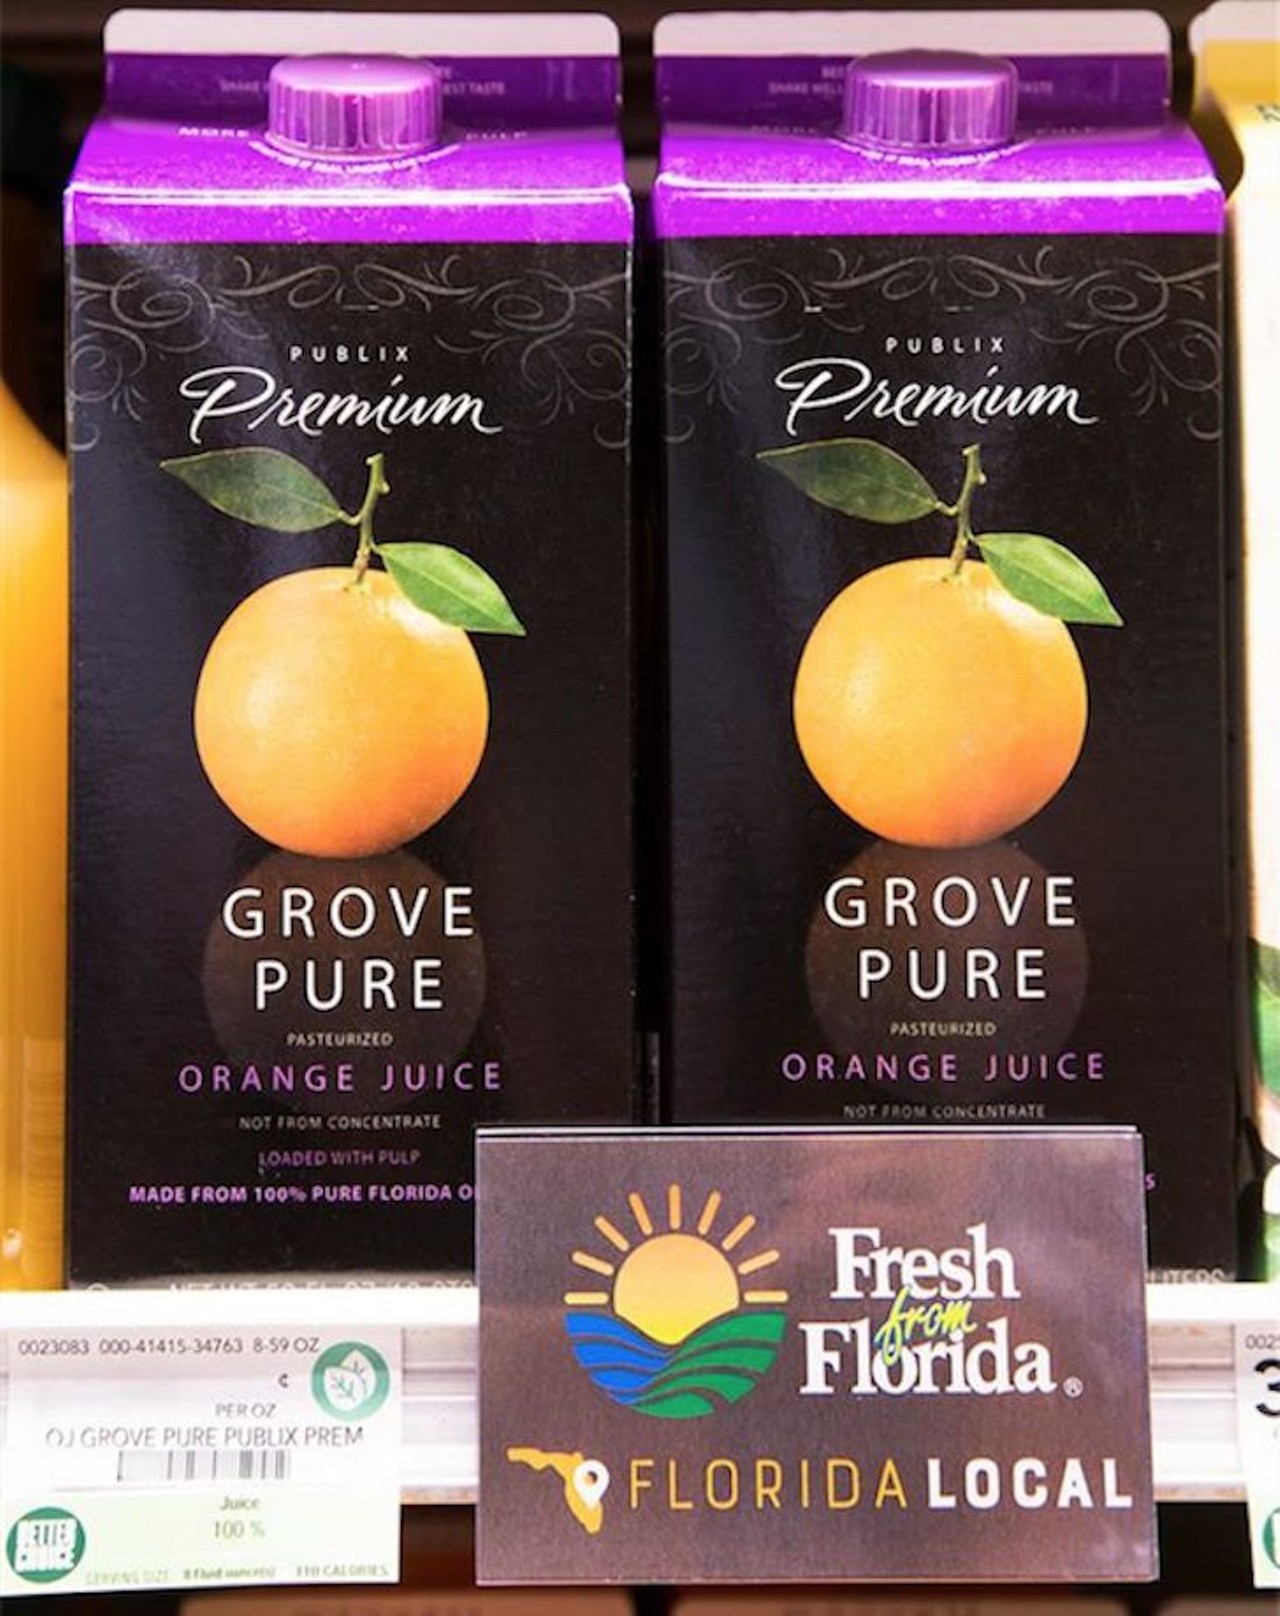 Most Publix brand food is the exact same as the good stuff 
Save money by buying Publix store brands, which are made by leading manufacturers but way less expensive. Roughly the same quality of goods, but for a cheaper price.
Photo via Publix Facebook